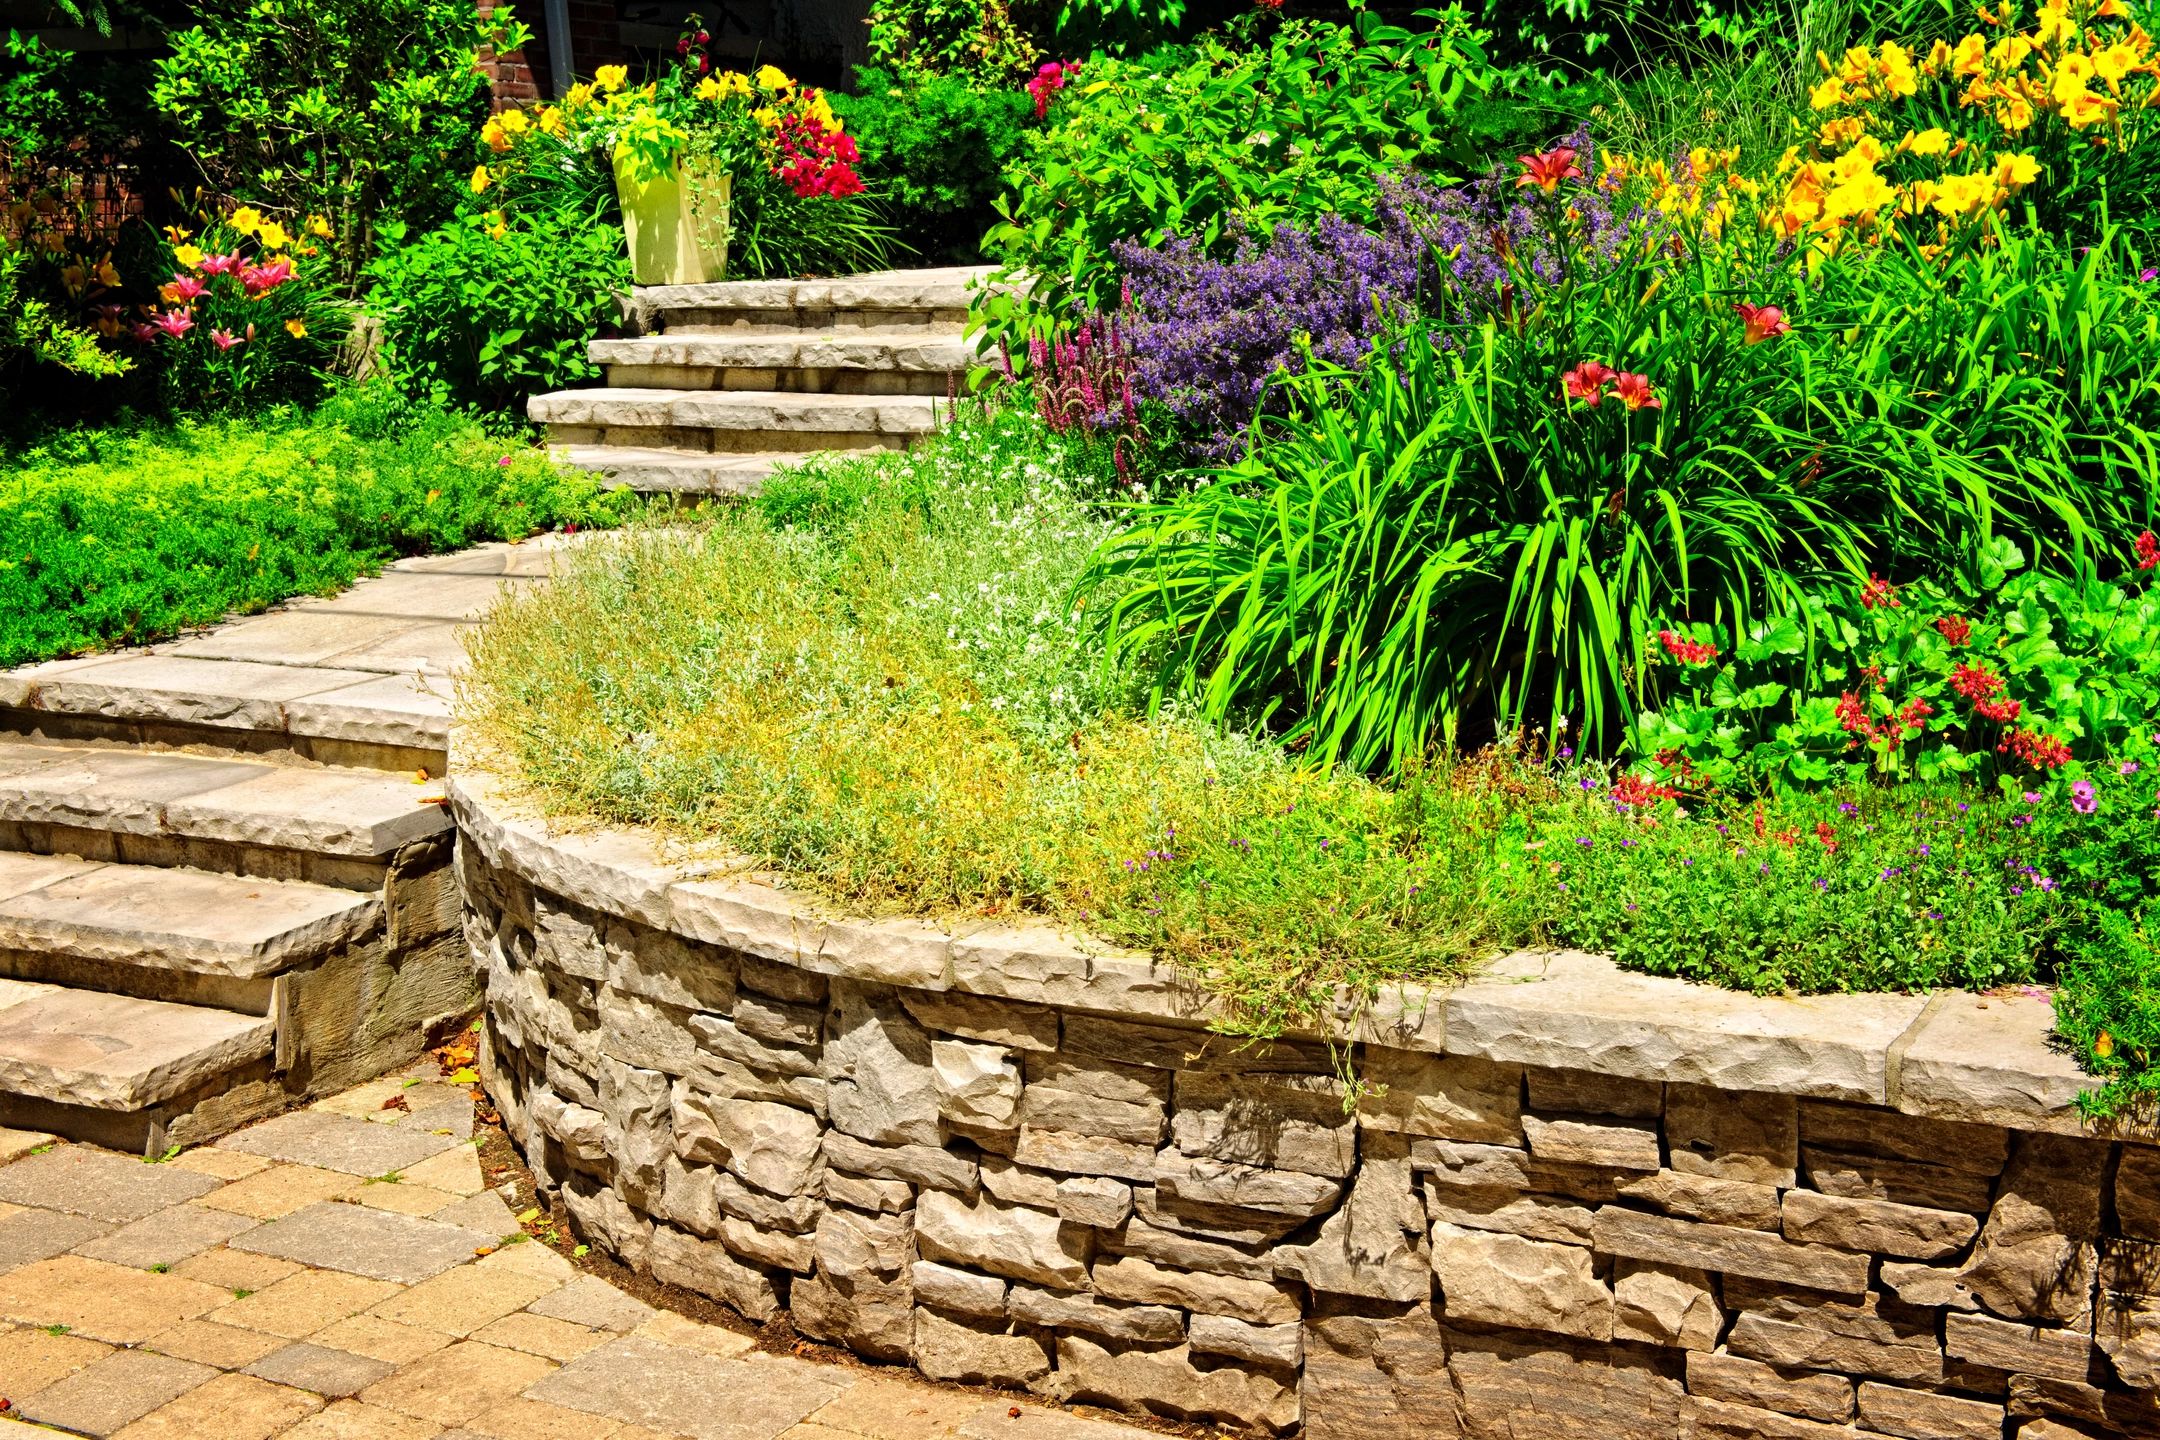 Services for your home and business garden - retaining wall and stone staircase.